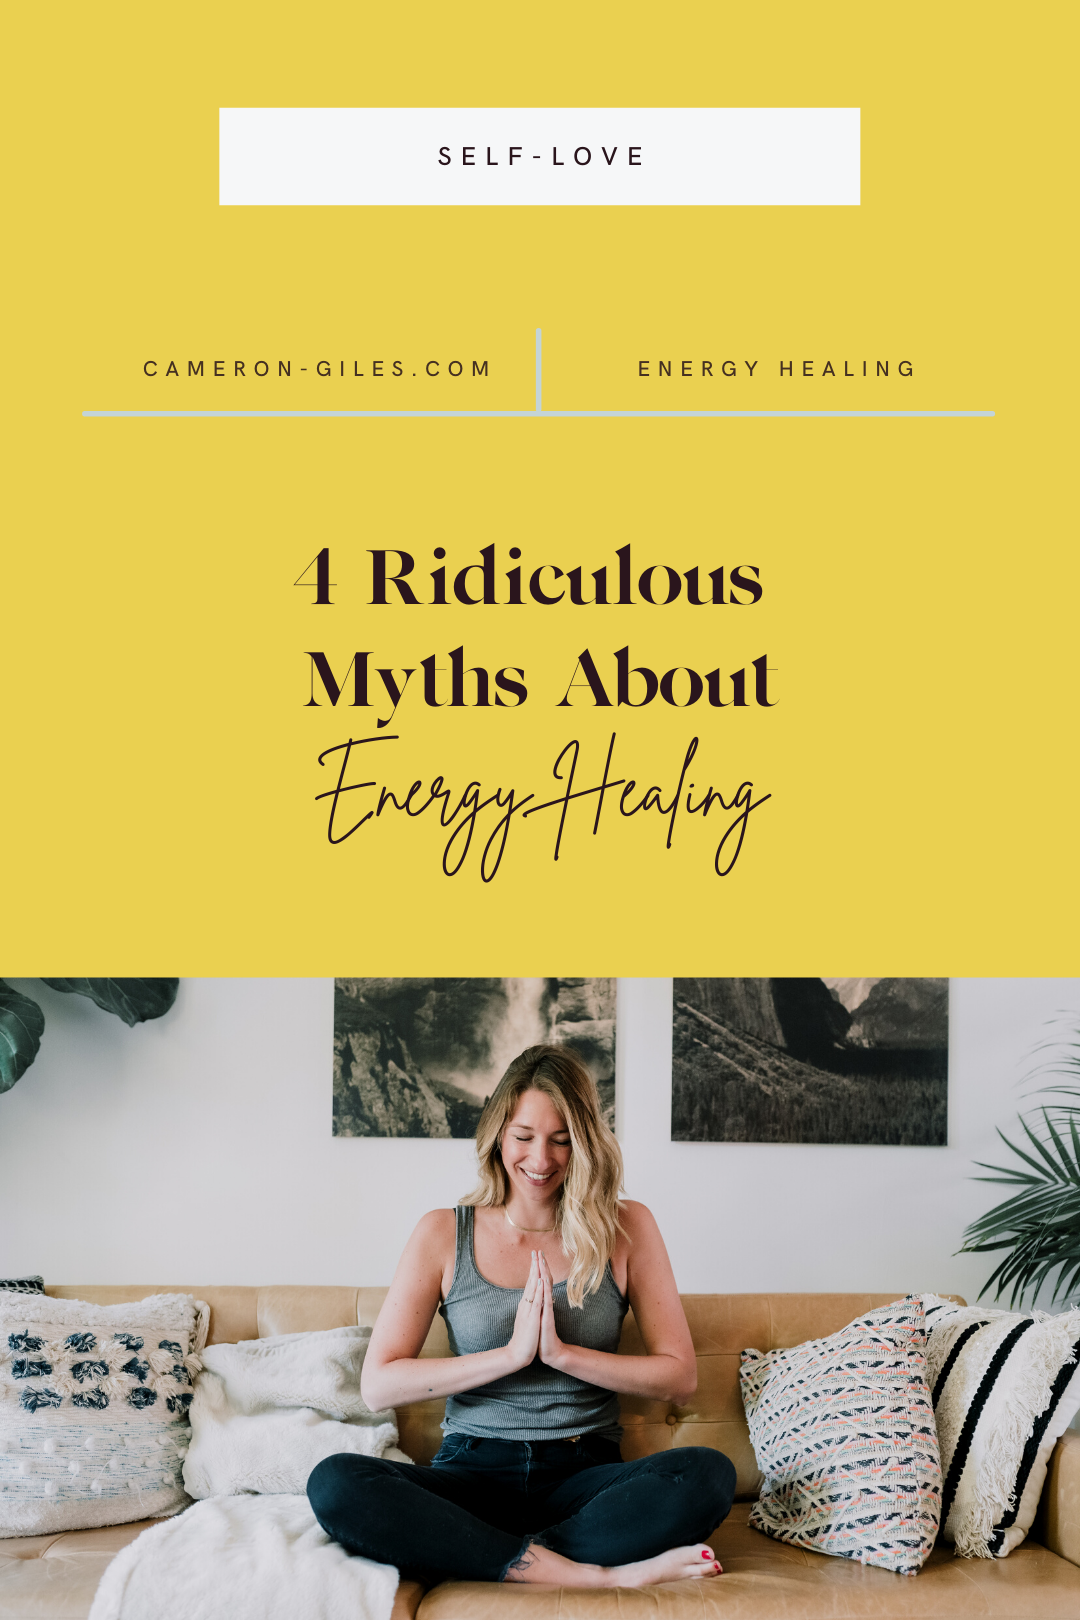 4 ridiculous myths about energy healing